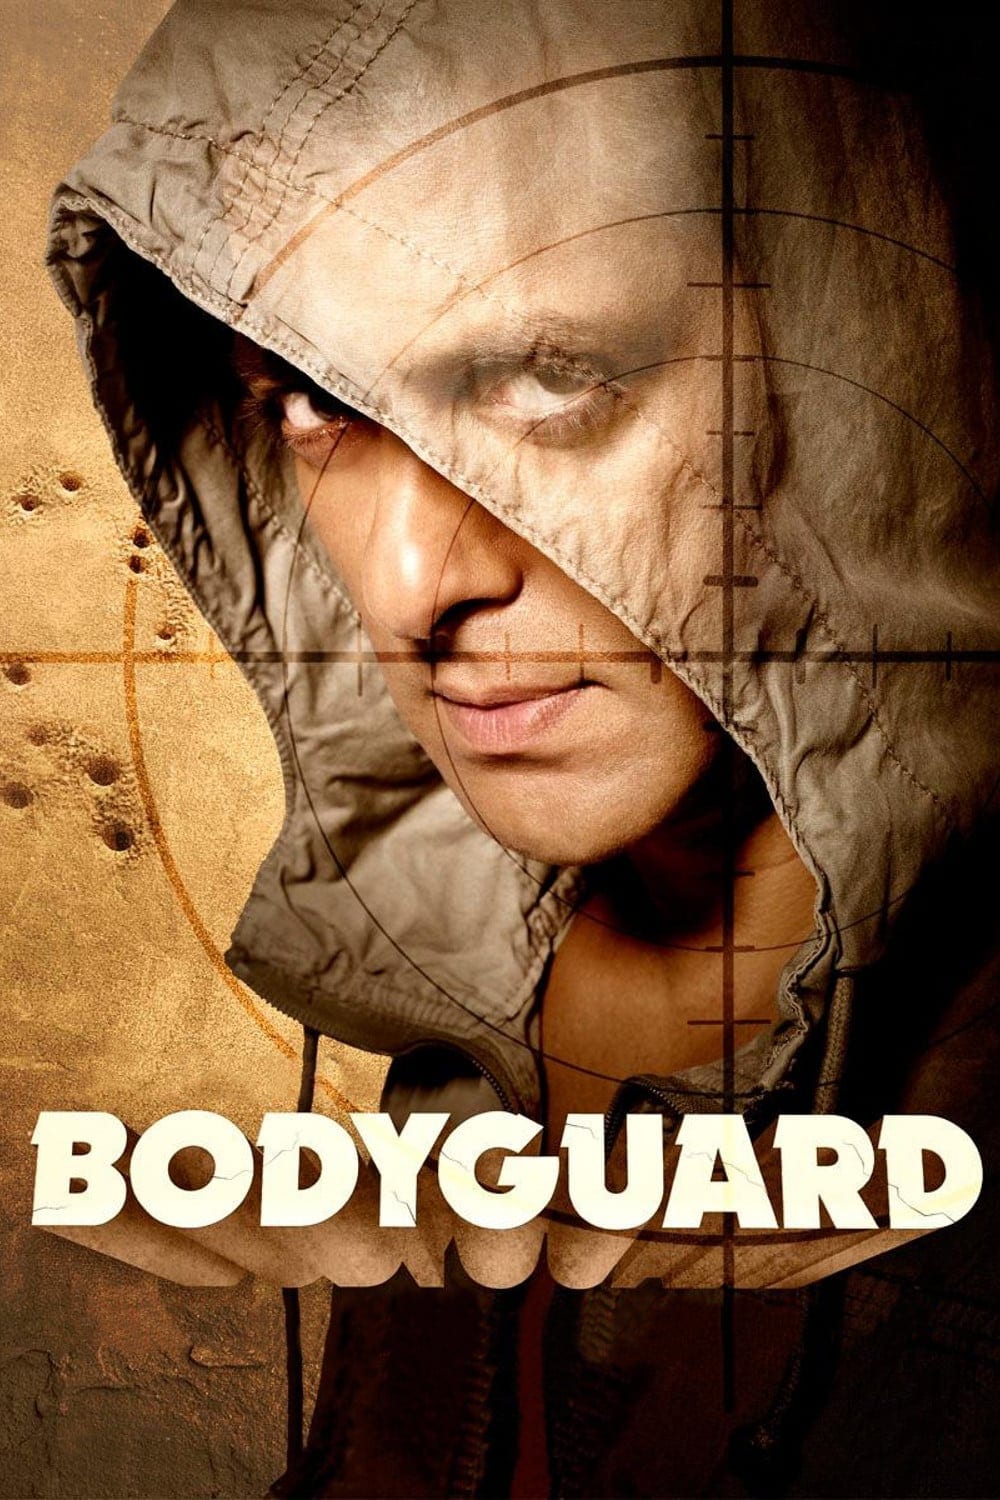 Poster for the movie "Bodyguard"